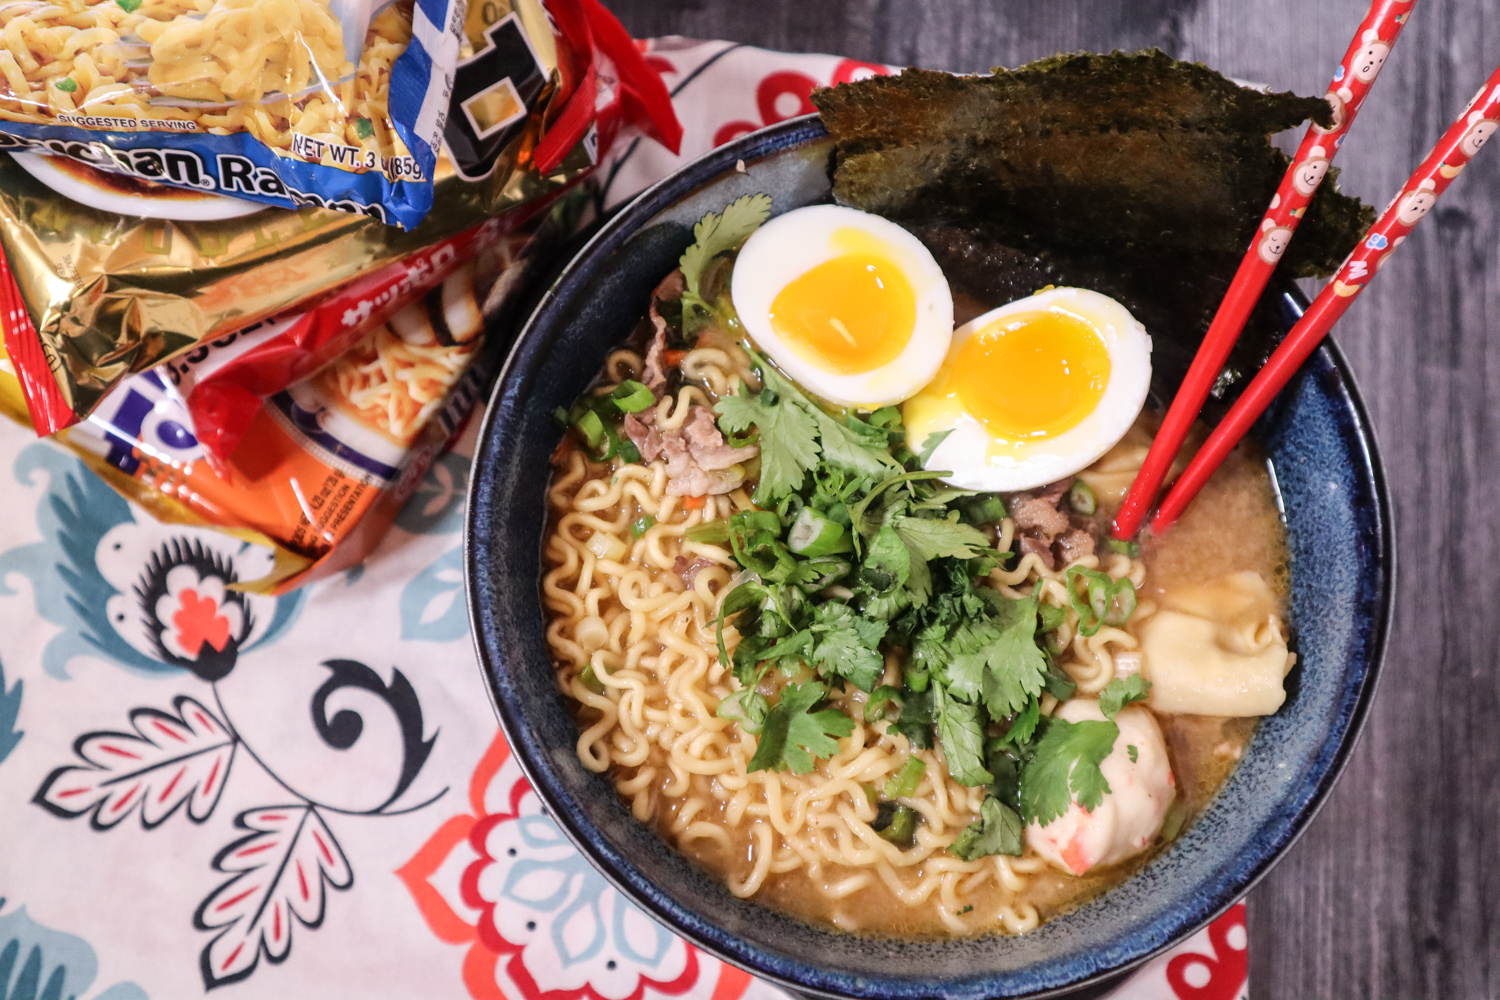 Cup Korean instant noodles Shin Ramyun - Spicy beef broth flavour